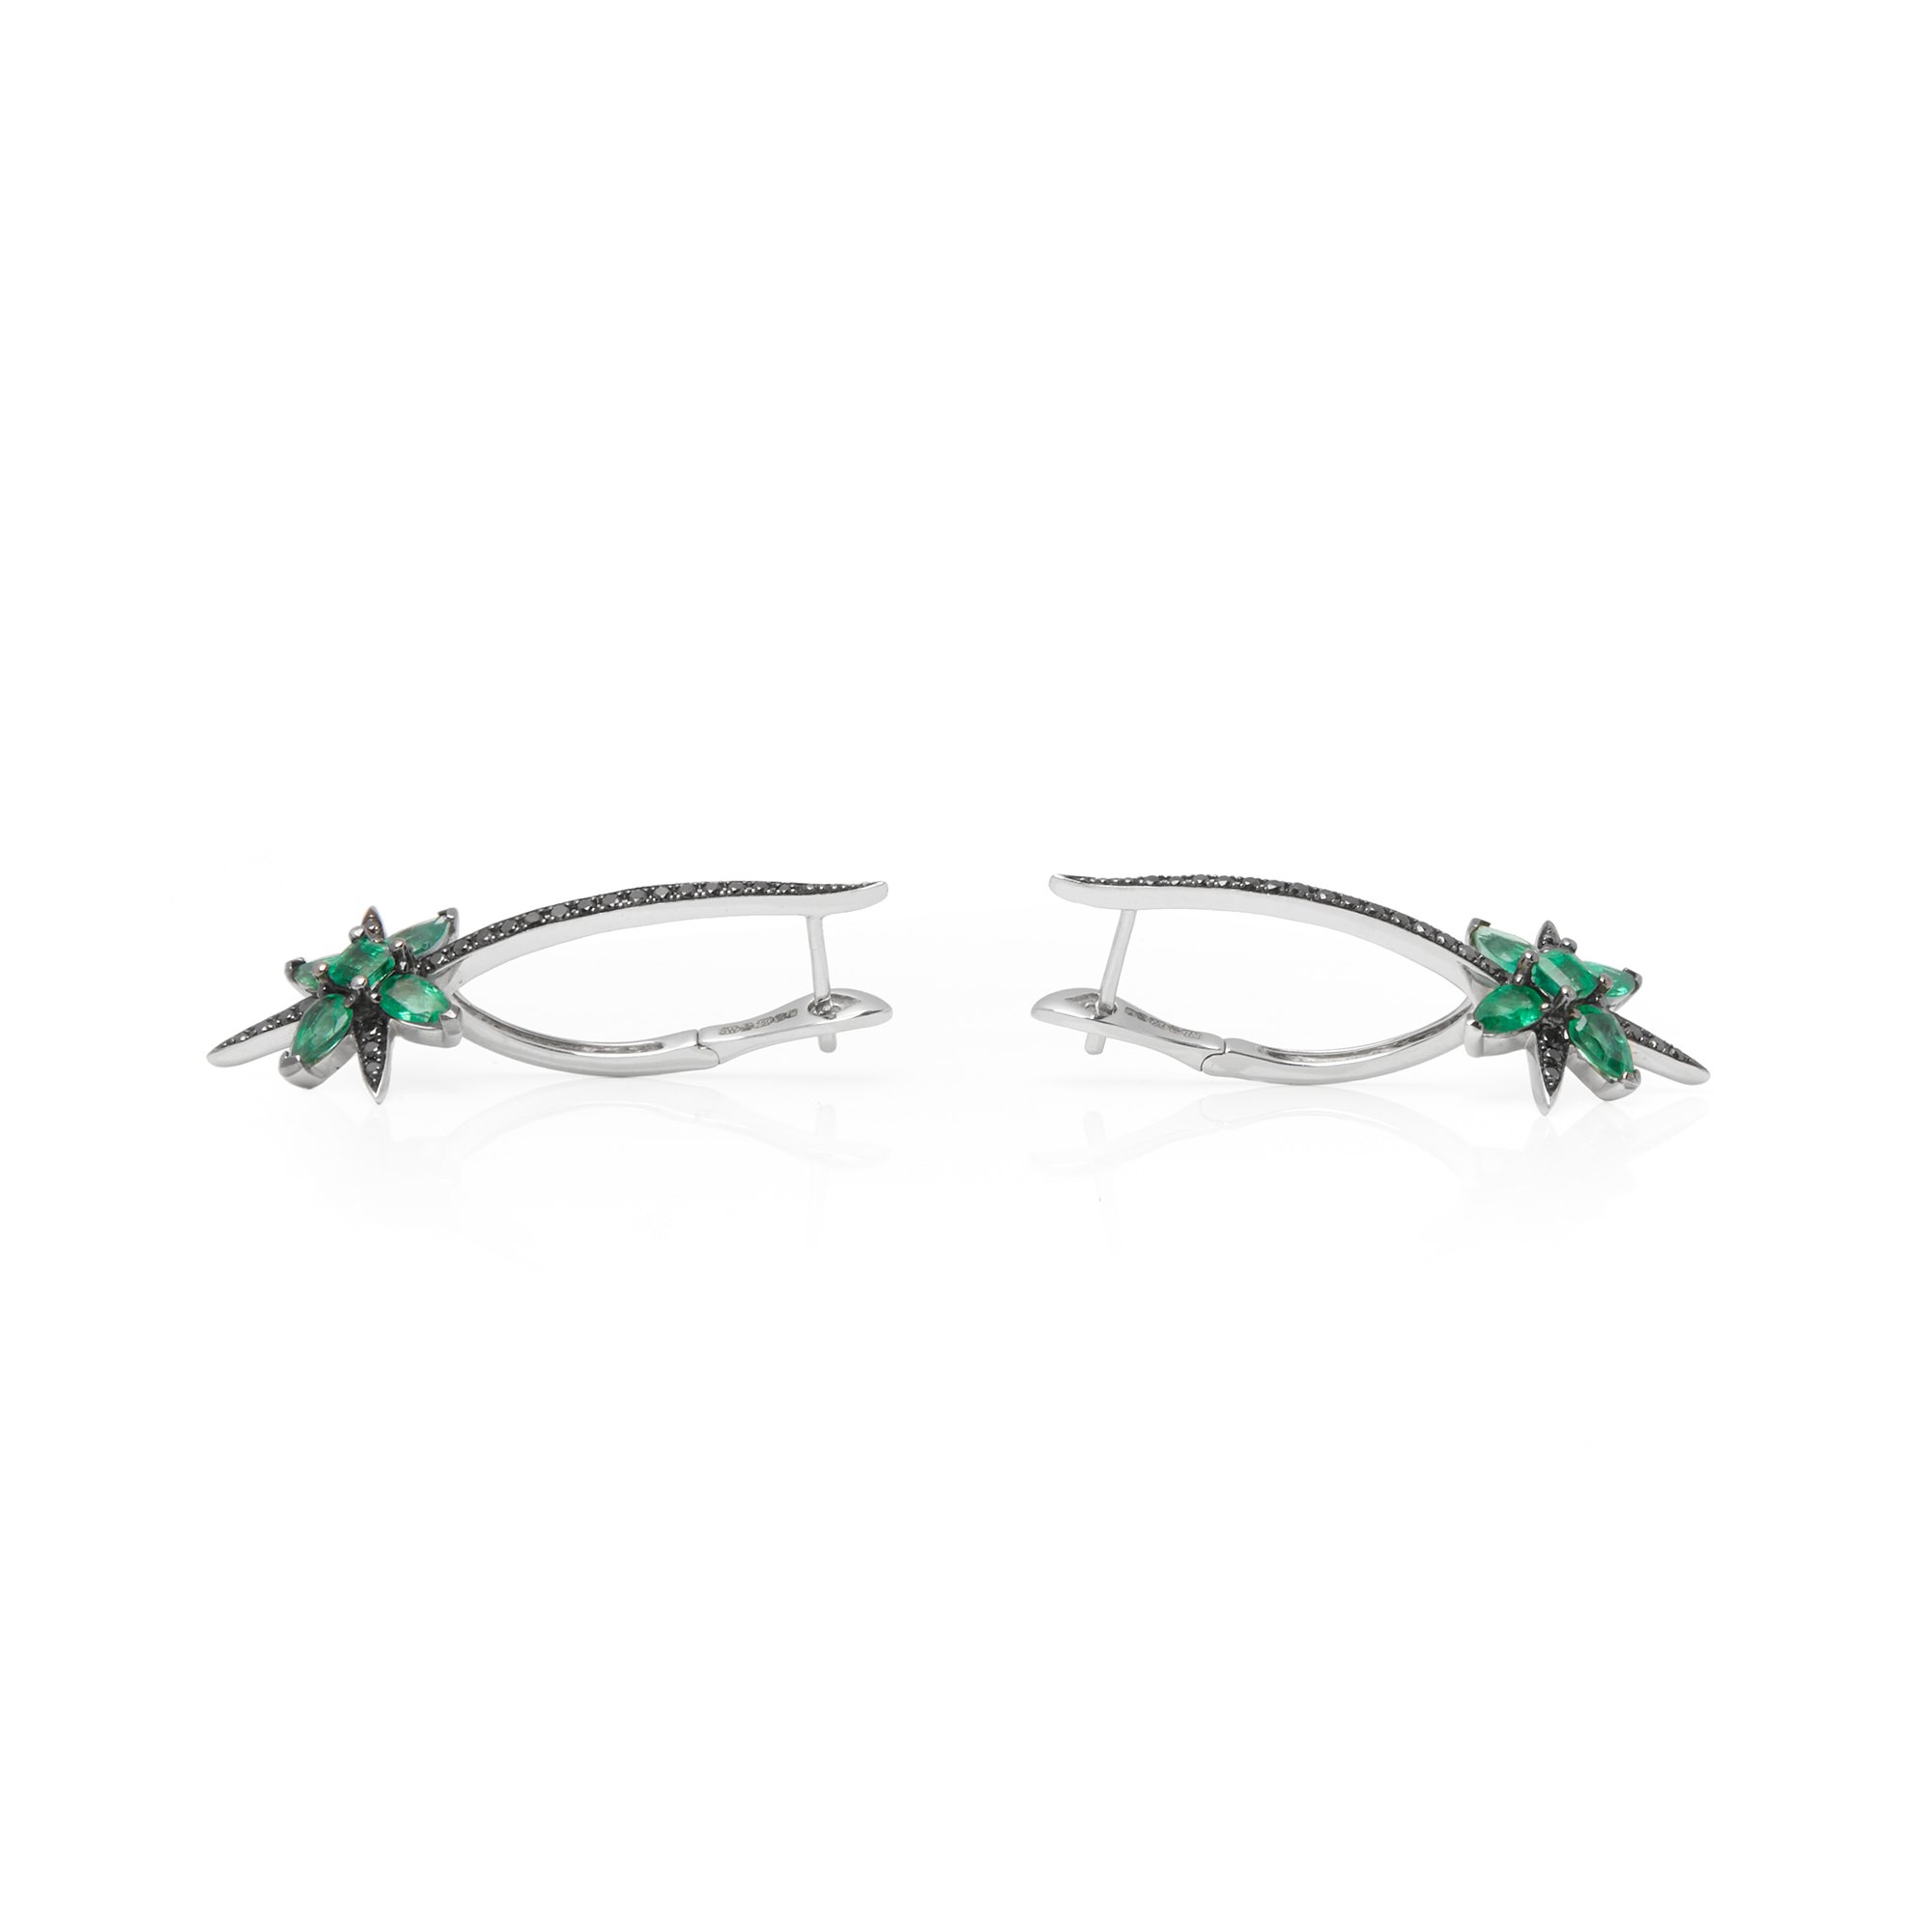 Stephen Webster 18ct White Gold Belle Epoque Emerald and Diamond Earring